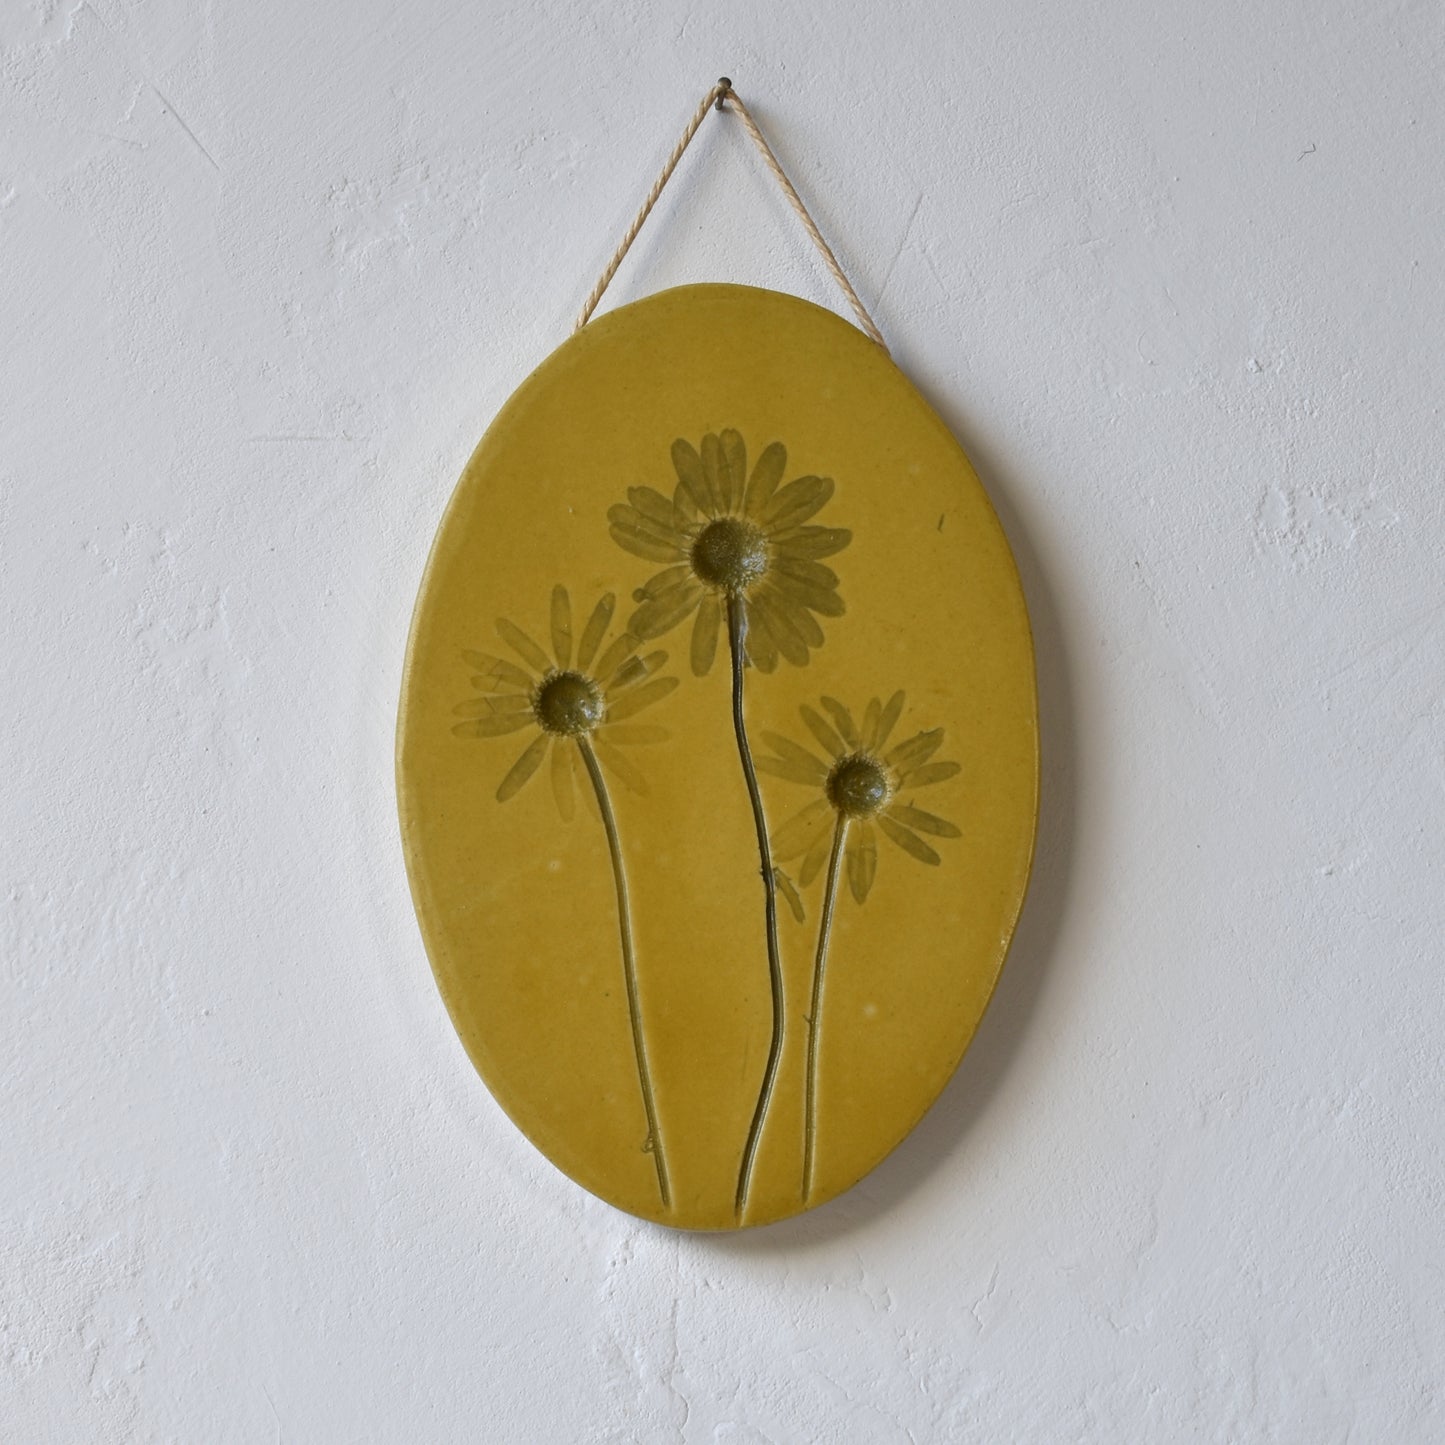 7" Oxeye Daisy Wall Hanging in Yellow